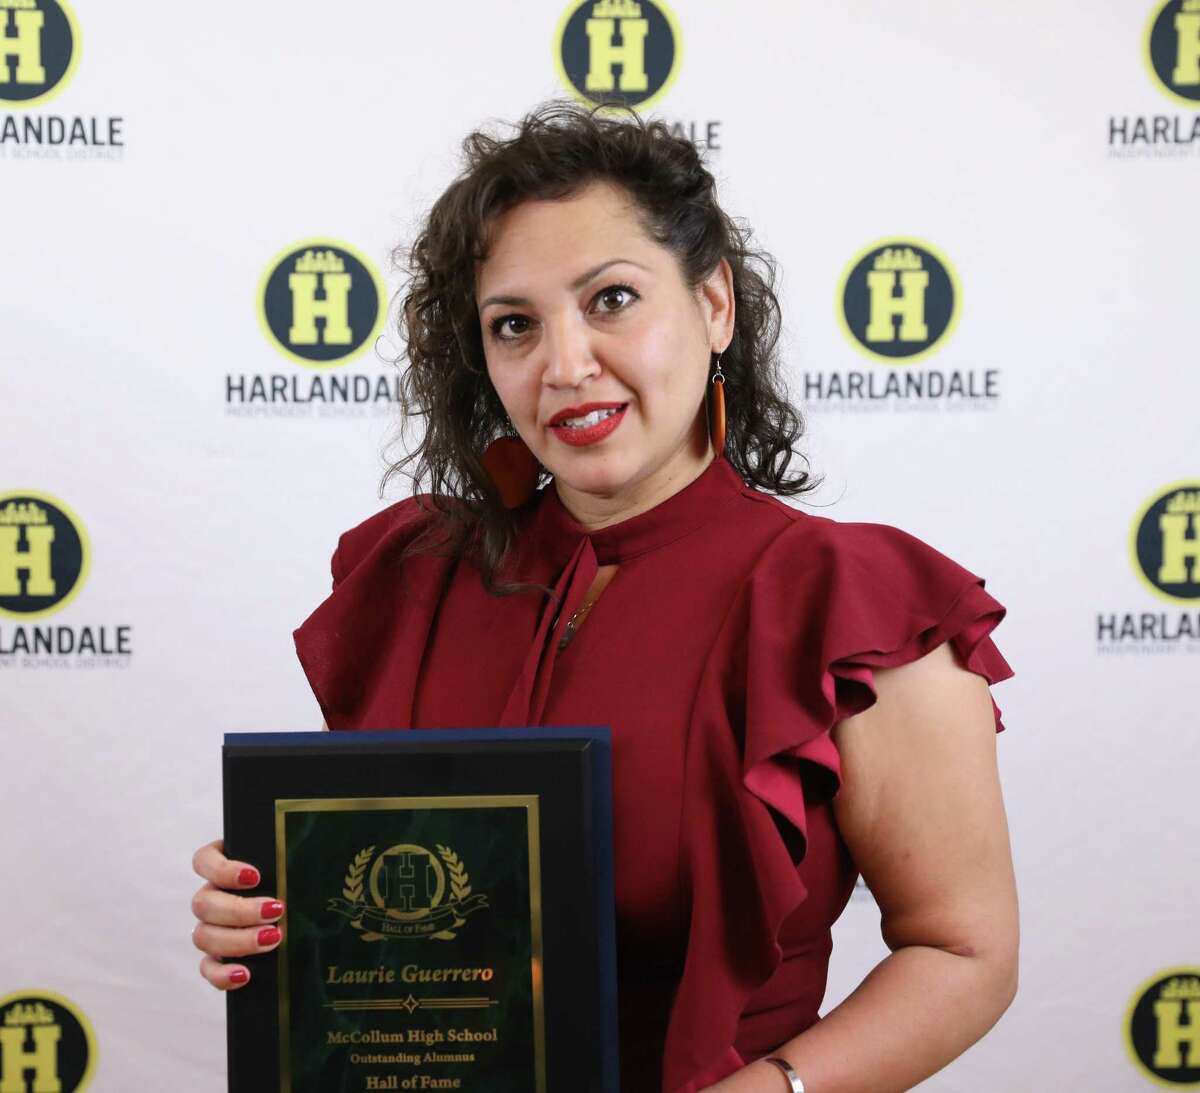 Laurie Ann Guerrero, a 1996 McCollum High School graduate, is a recent inductee of the Harlandale ISD Hall of Fame.